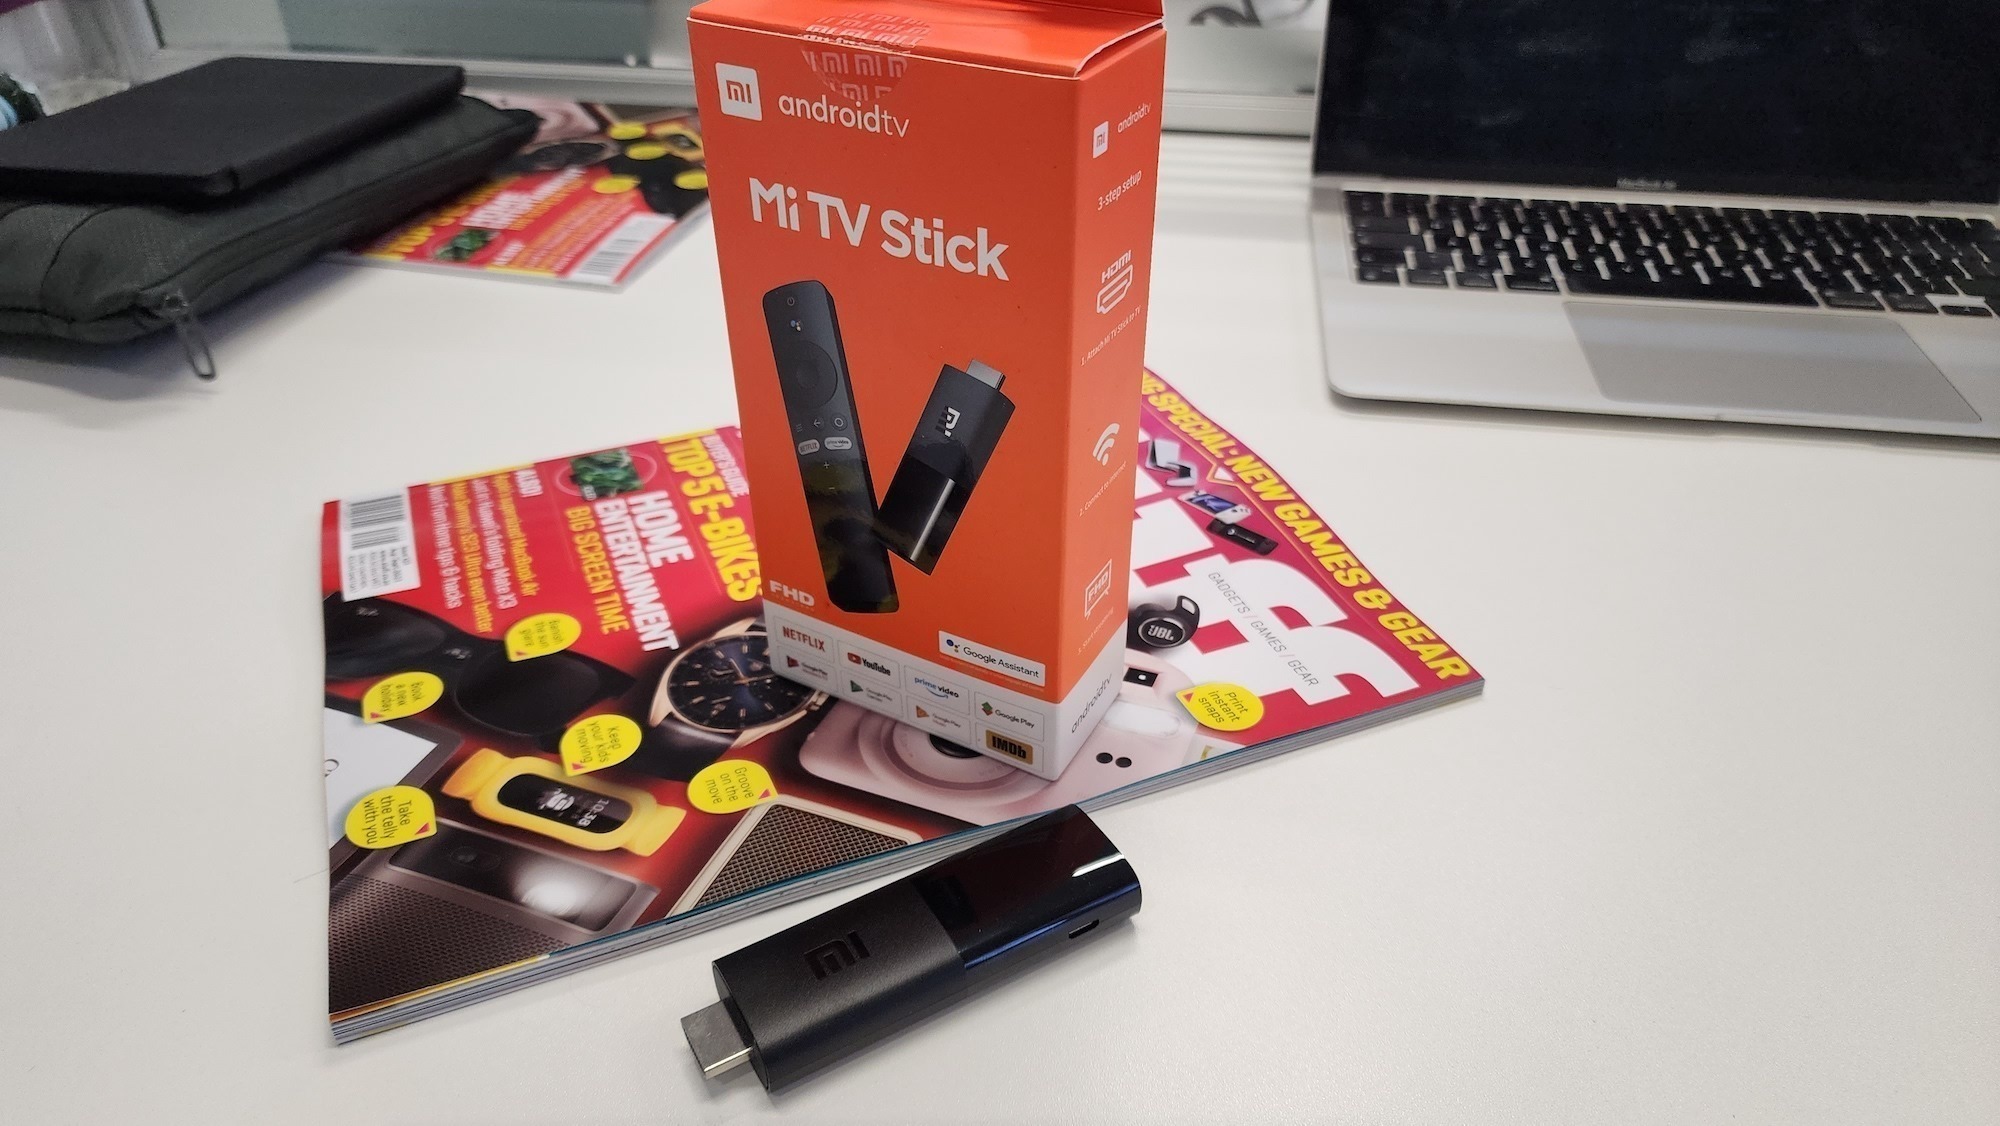 Xiaomi Mi TV Stick Review - Give Your Aging TV Some Stick